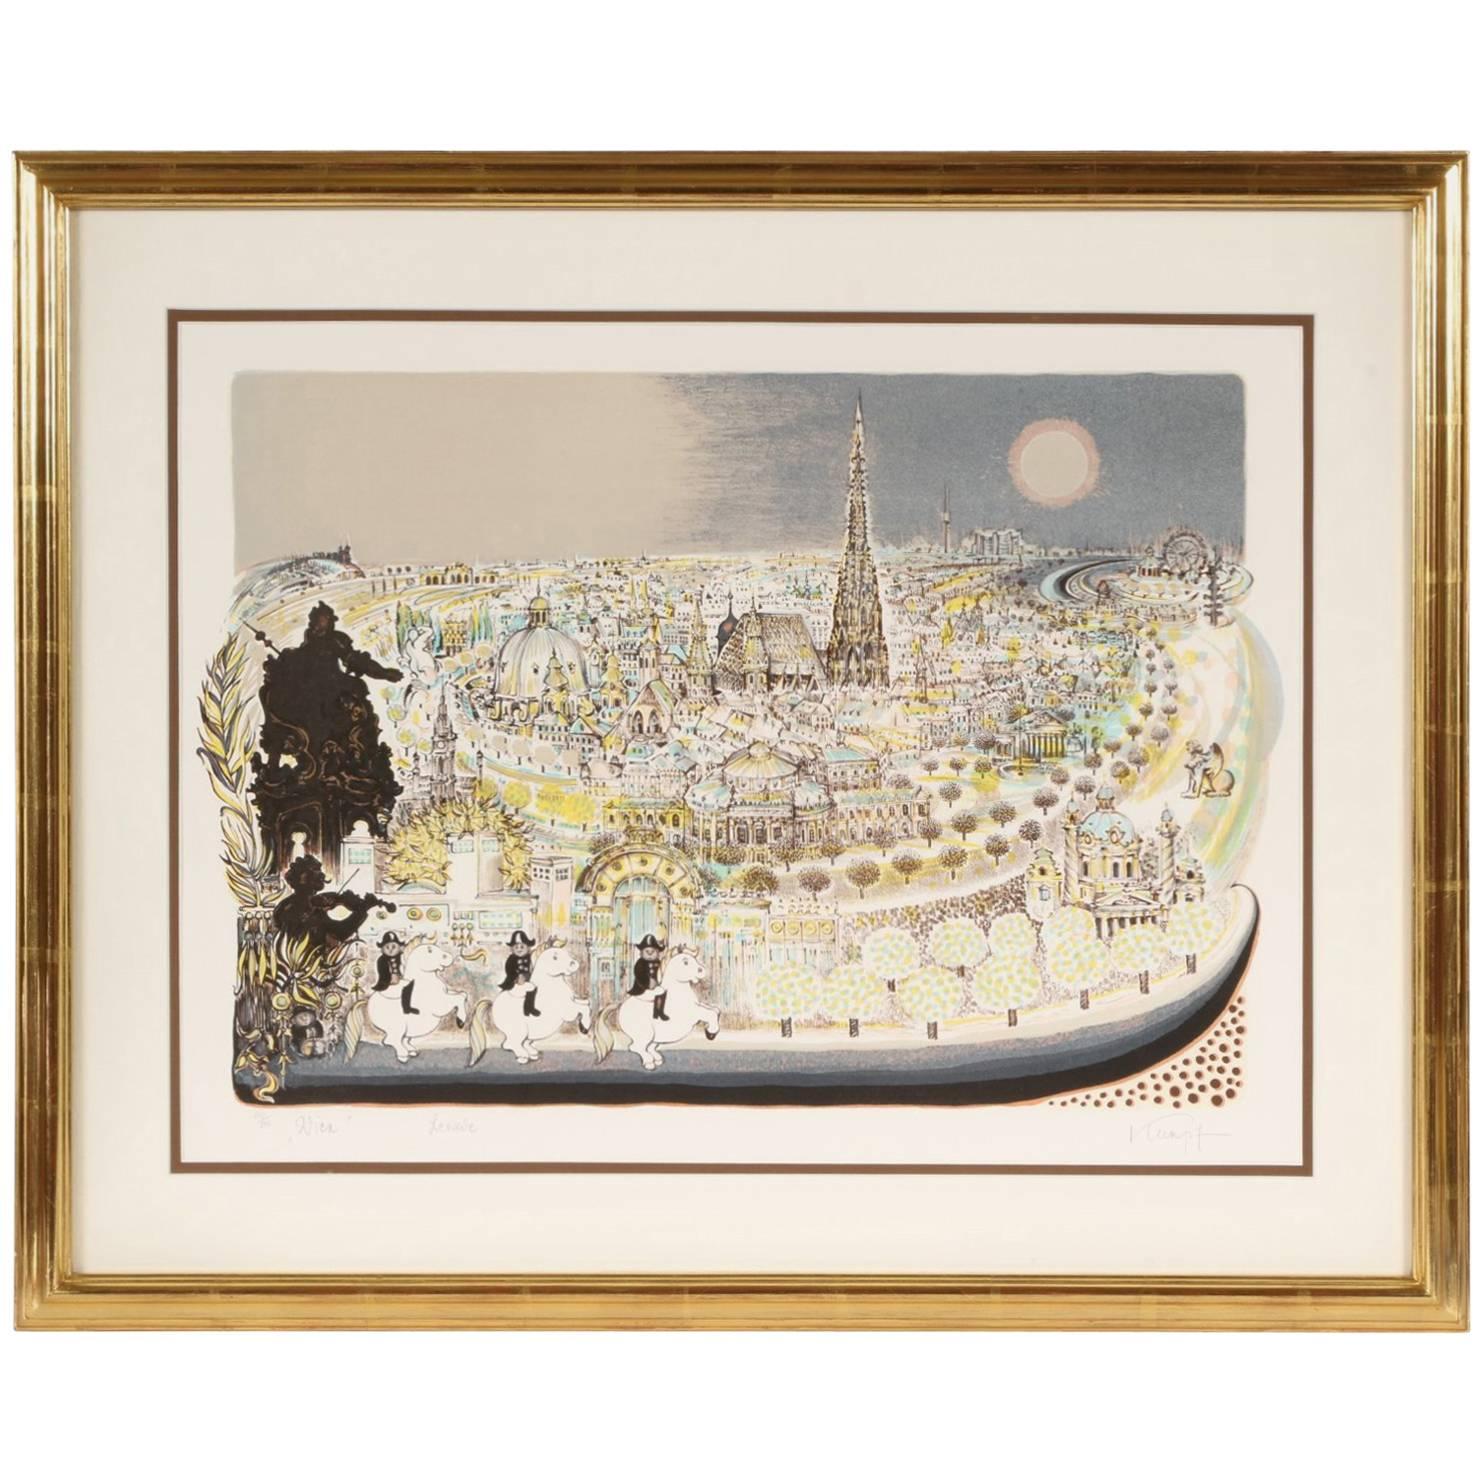 Artist Signed Modern Color Print with Lippezaner Horses and Riders in Vienna